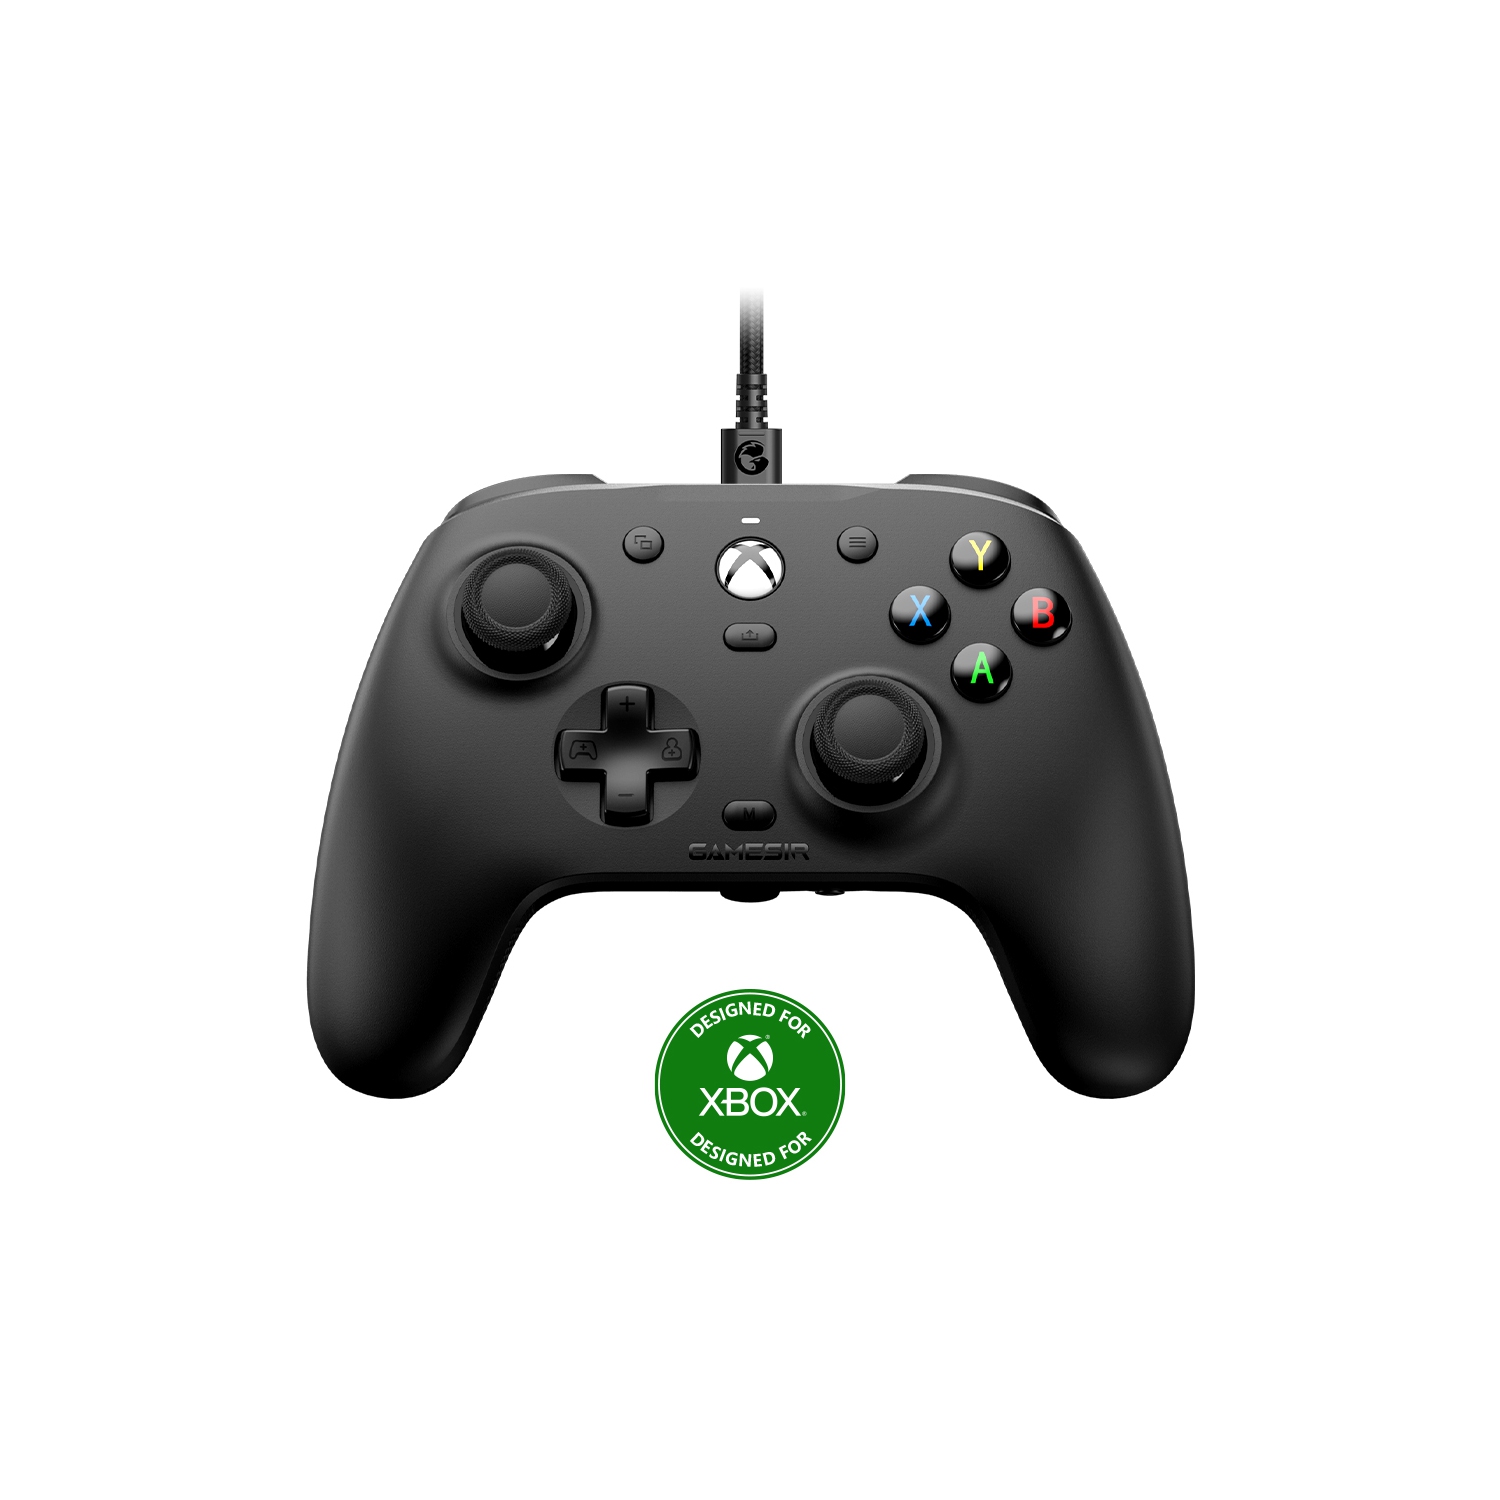 GameSir G7 Wired Controller for Xbox Series X|S, Xbox One and Windows 10/11 - Black - with Swappable White Faceplate